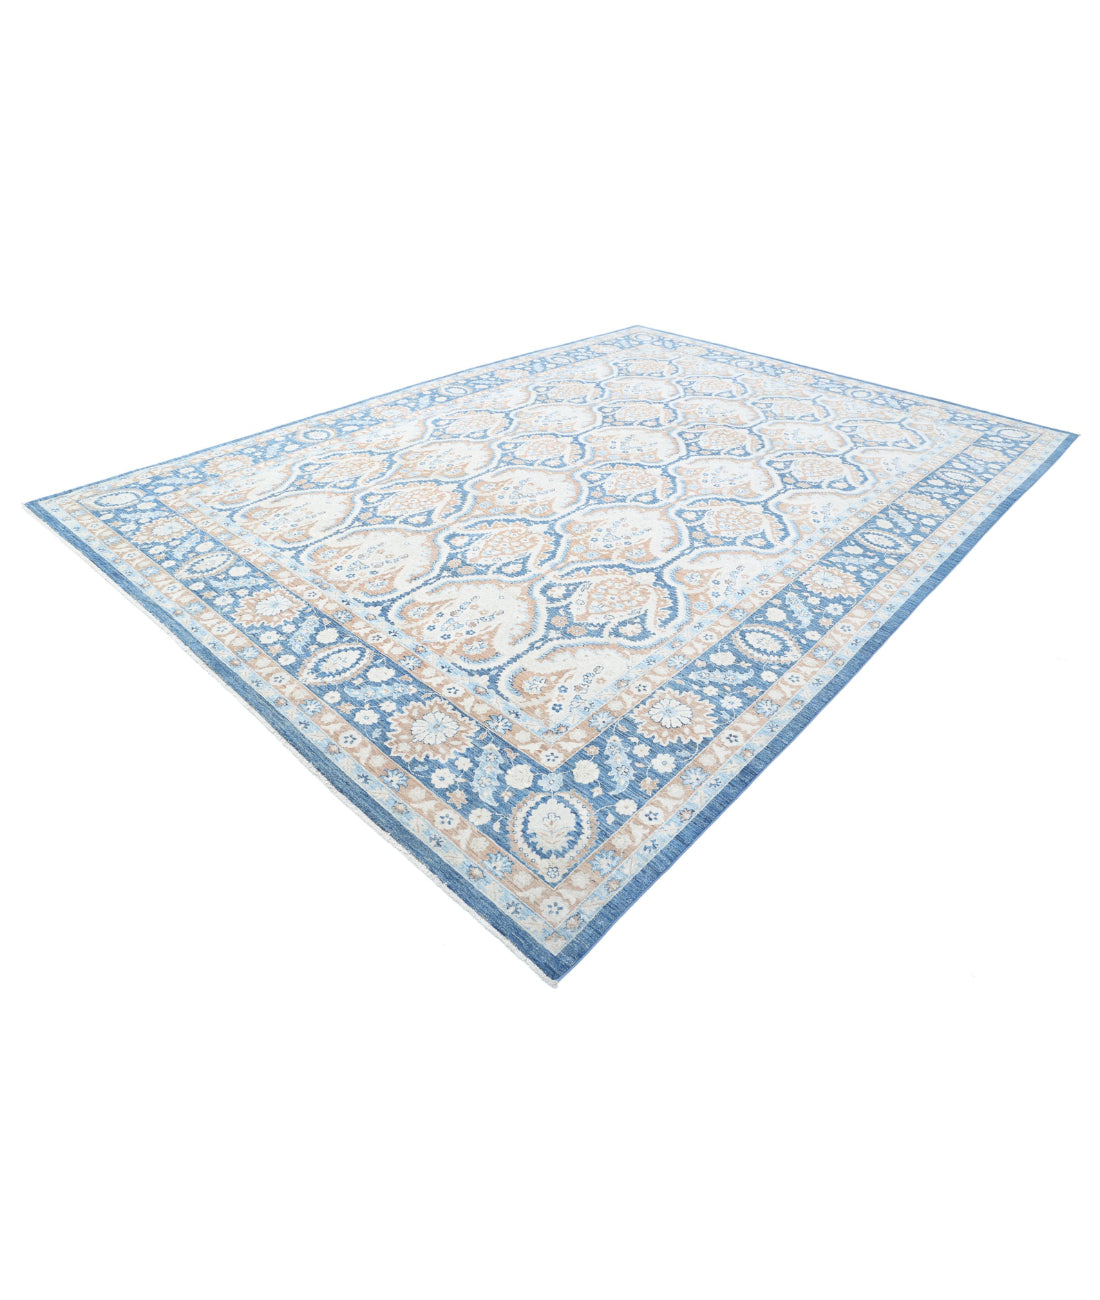 Ziegler 9'9'' X 13'10'' Hand-Knotted Wool Rug 9'9'' x 13'10'' (293 X 415) / Blue / Ivory